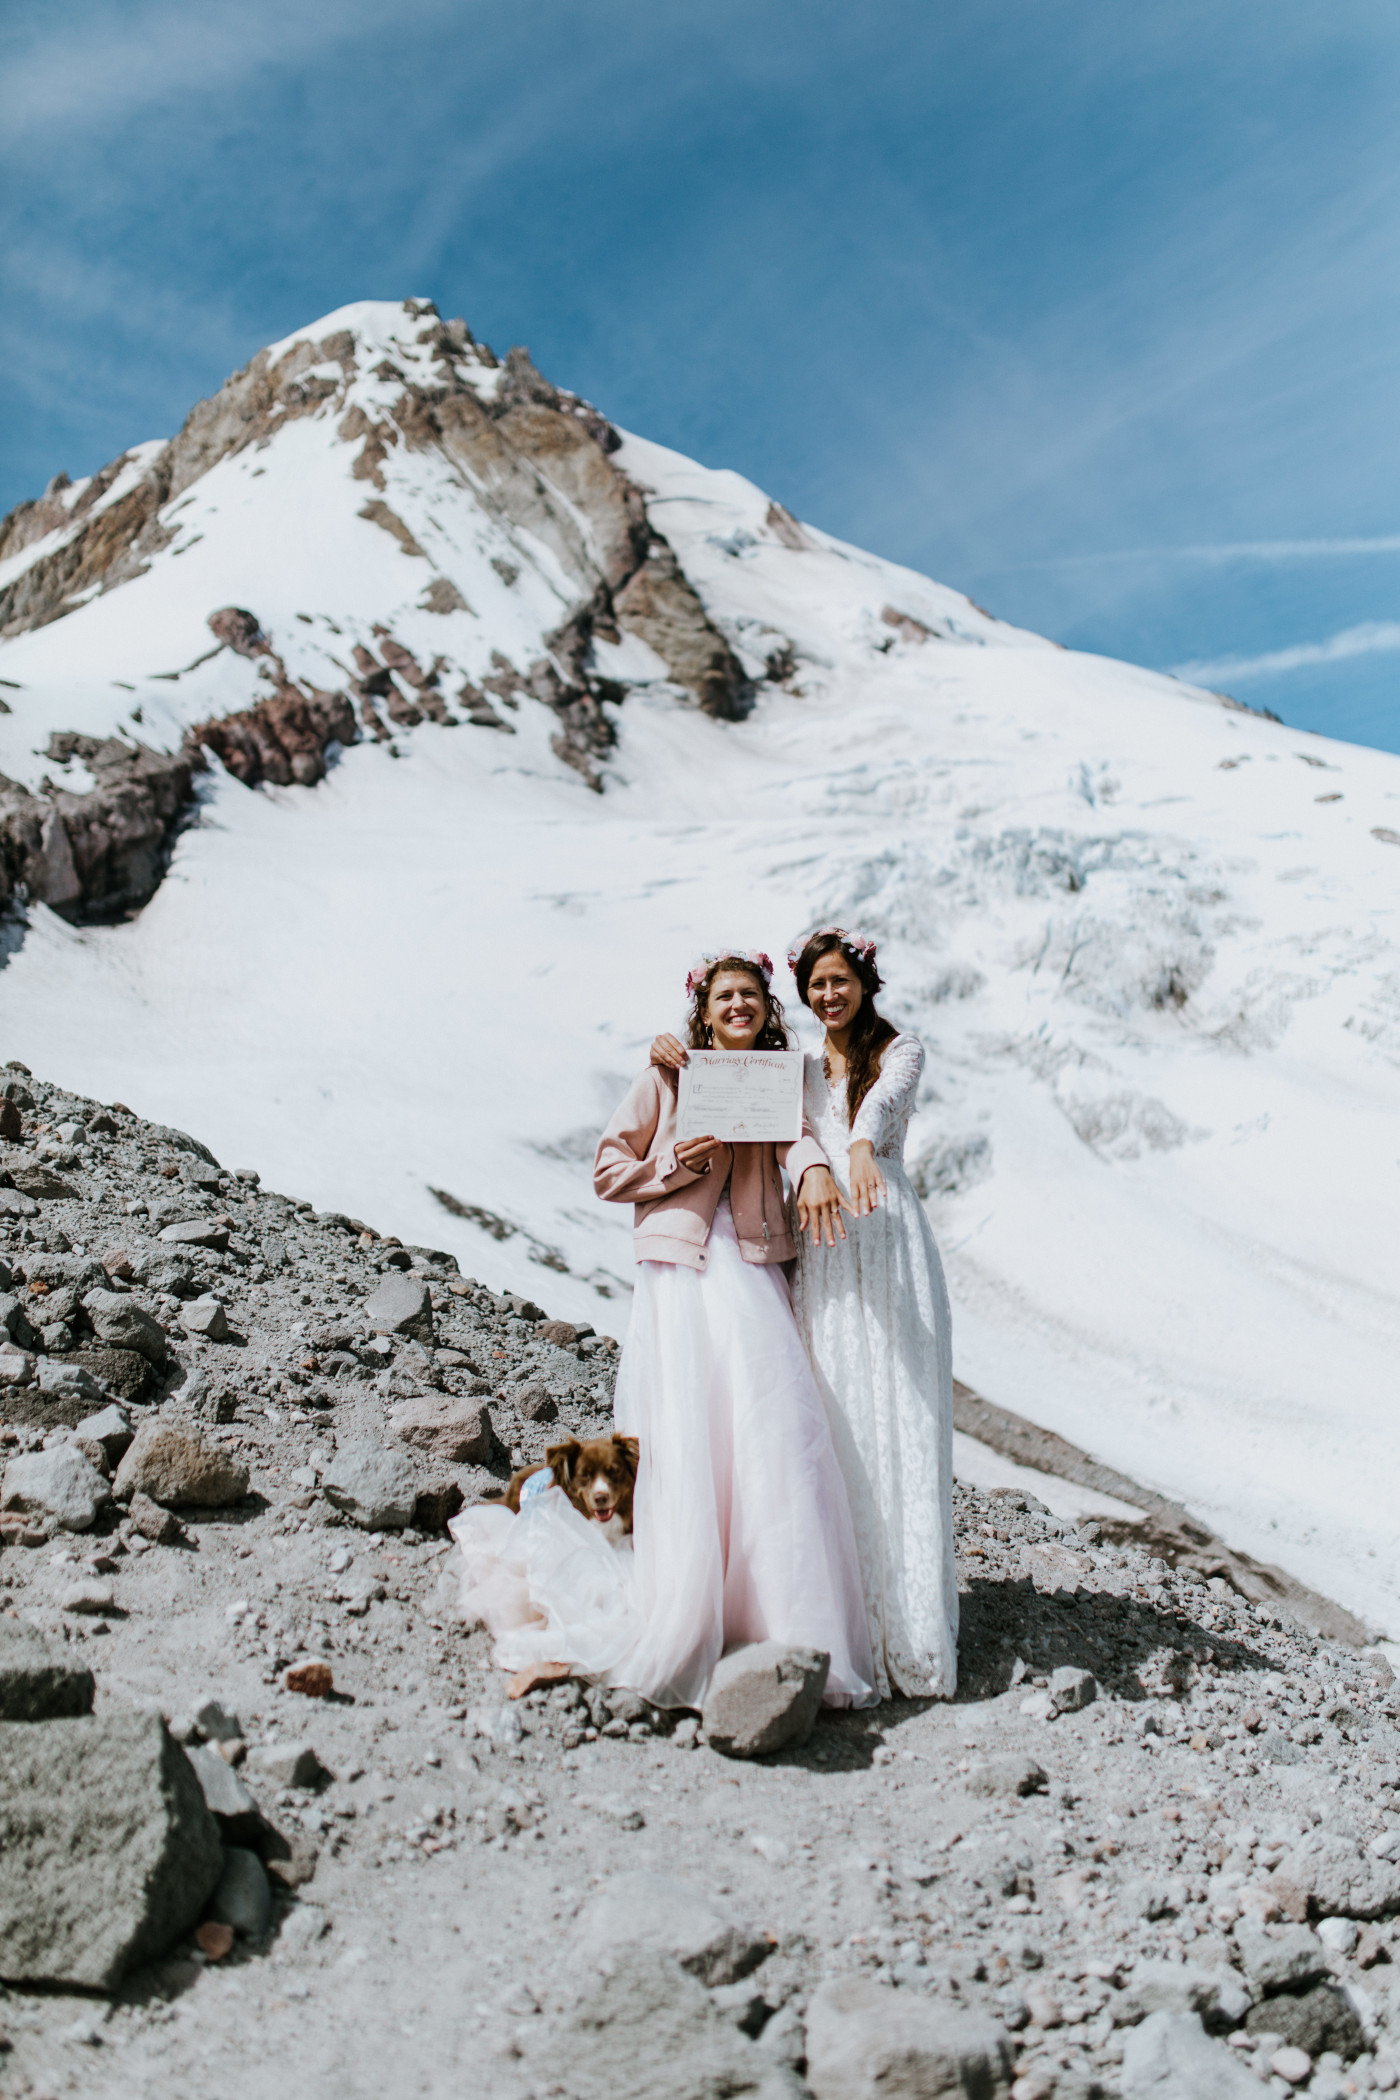 Margaux and Heather hold their marriage certificate and show off their rings in front of Mount Hood. Elopement photography at Mount Hood by Sienna Plus Josh.